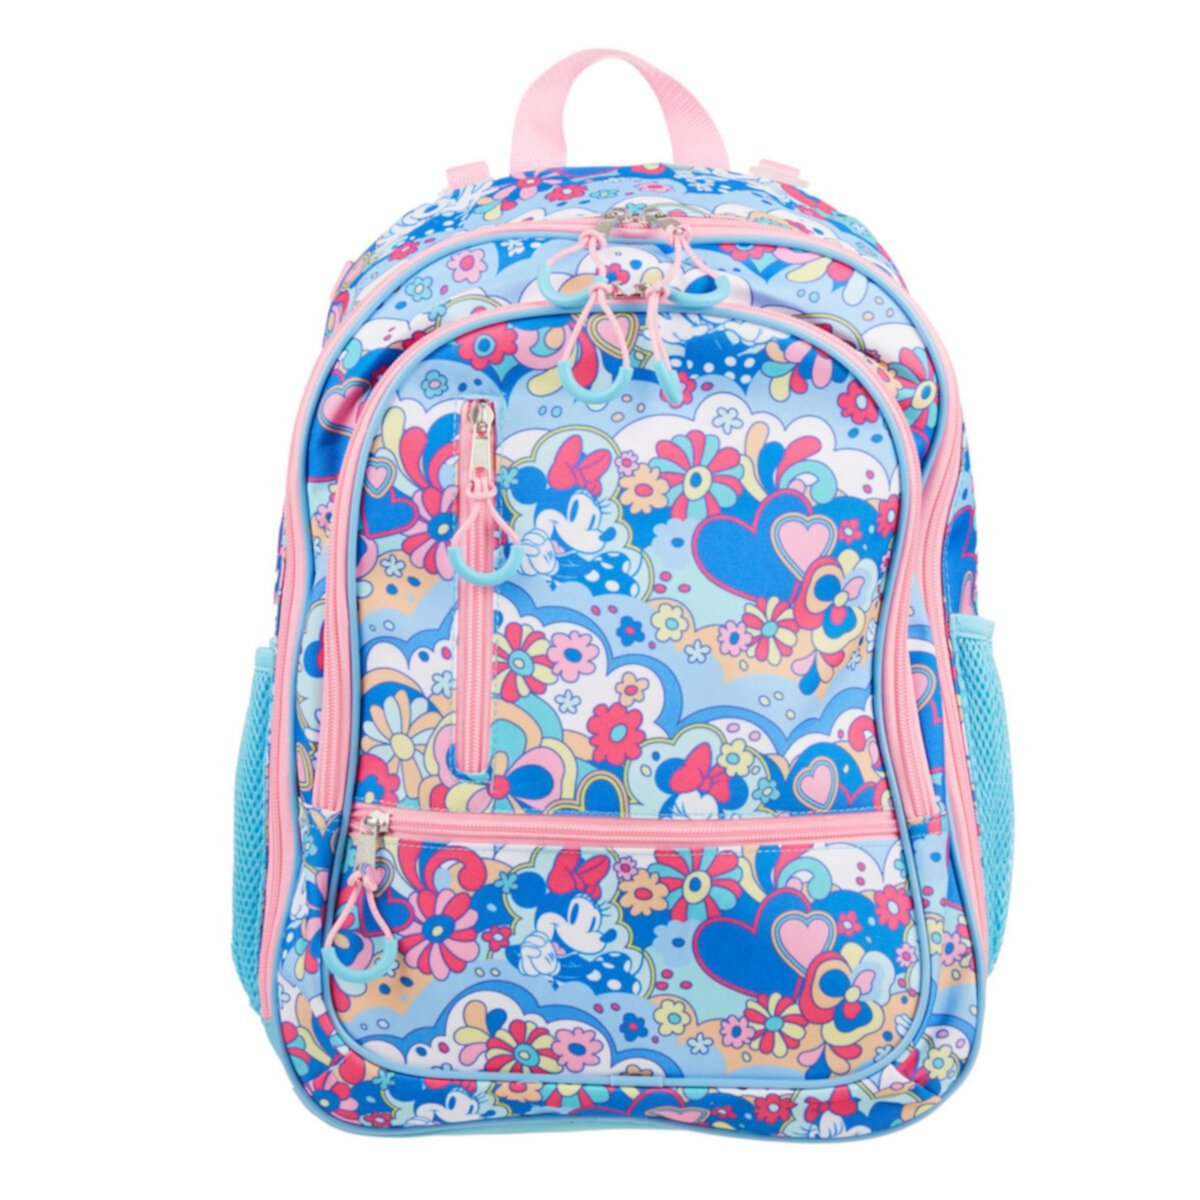 Disney's Minnie Mouse Adaptive Backpack Licensed Character